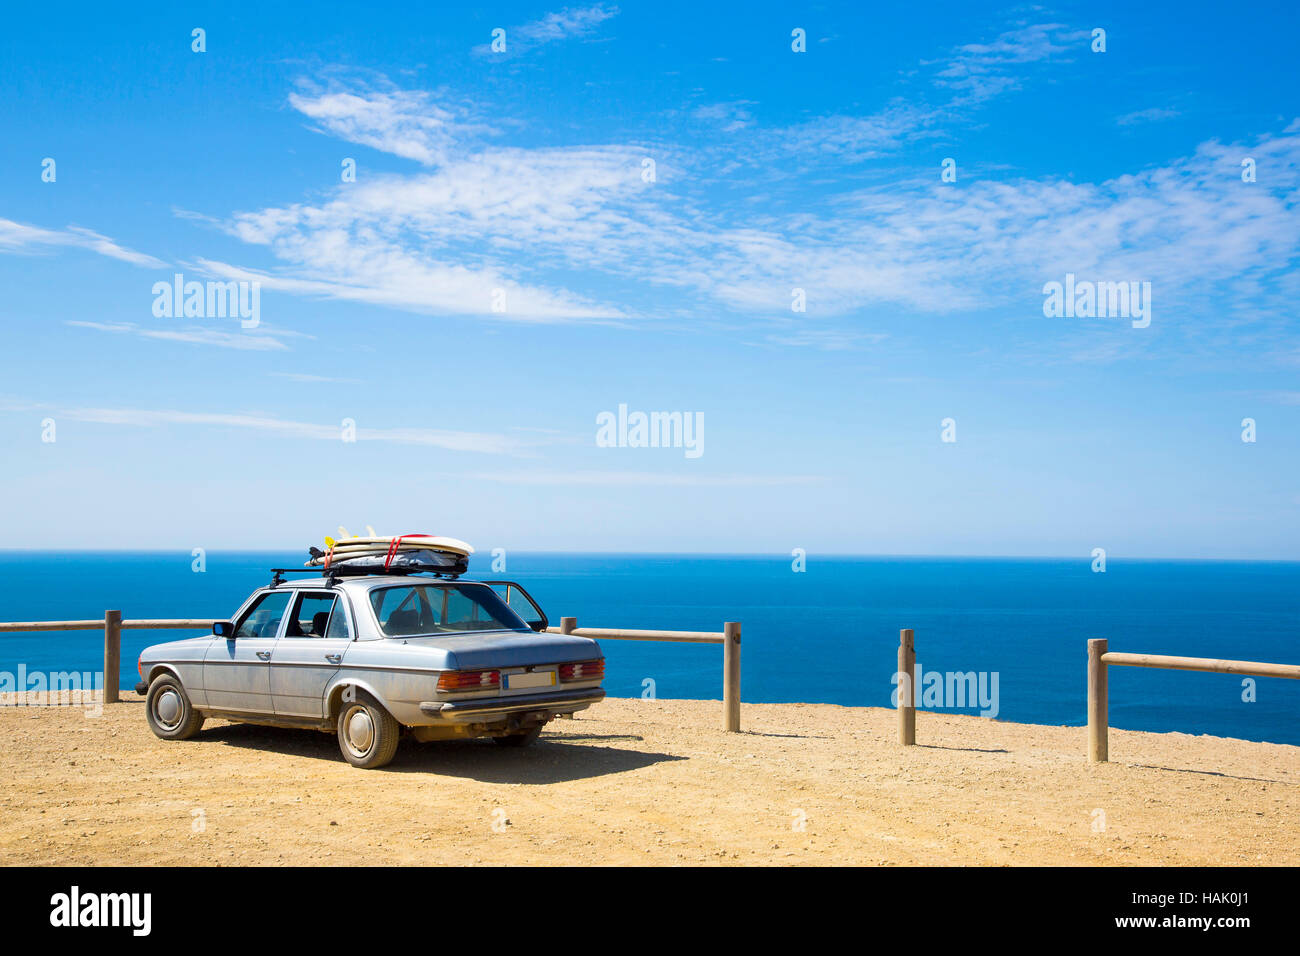 old retro car with surfboards on the roof and ocean in background Stock Photo